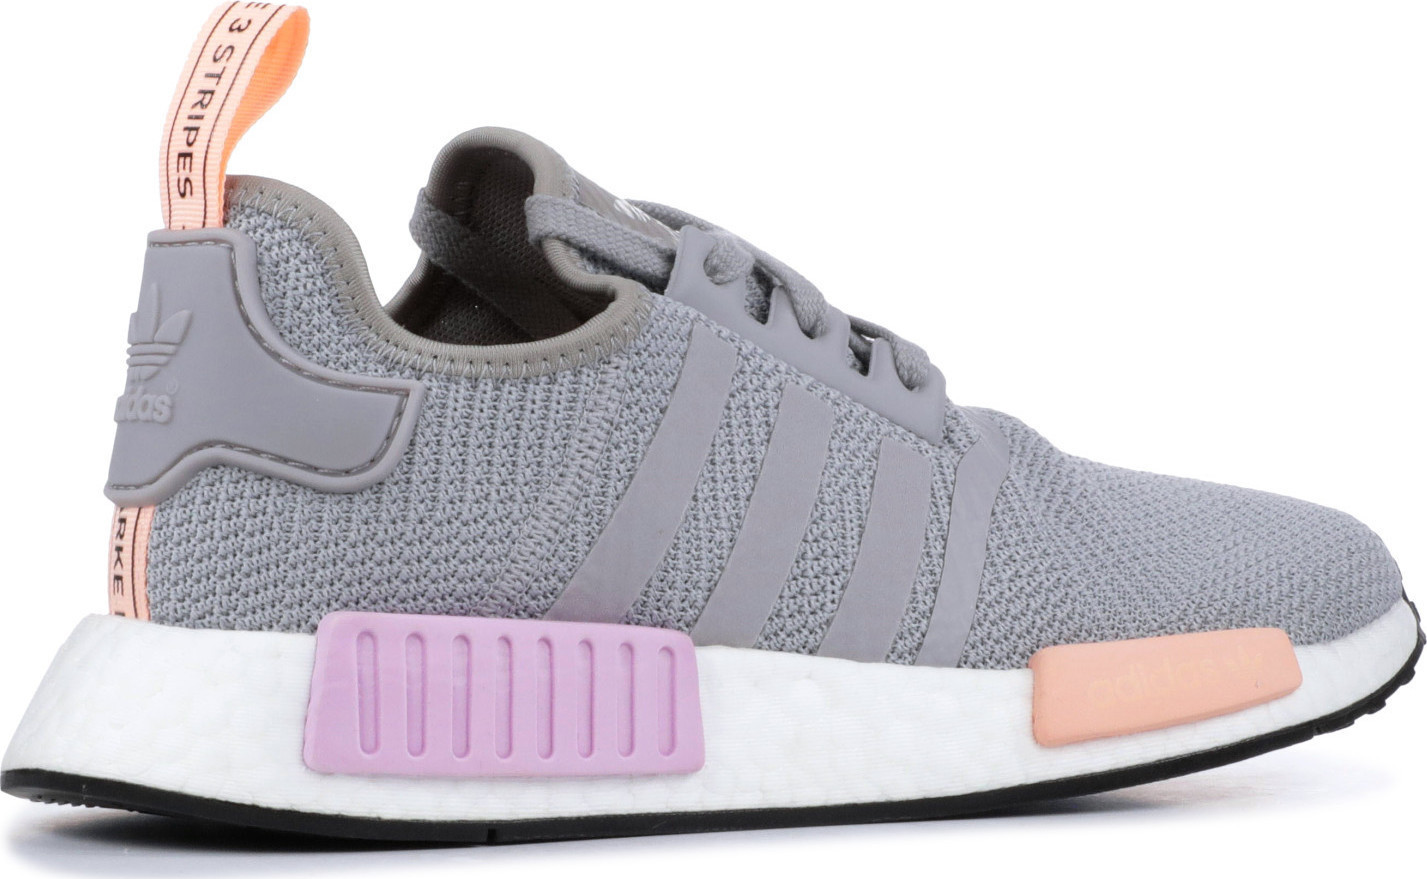 adidas nmd r1 skroutz cheap online